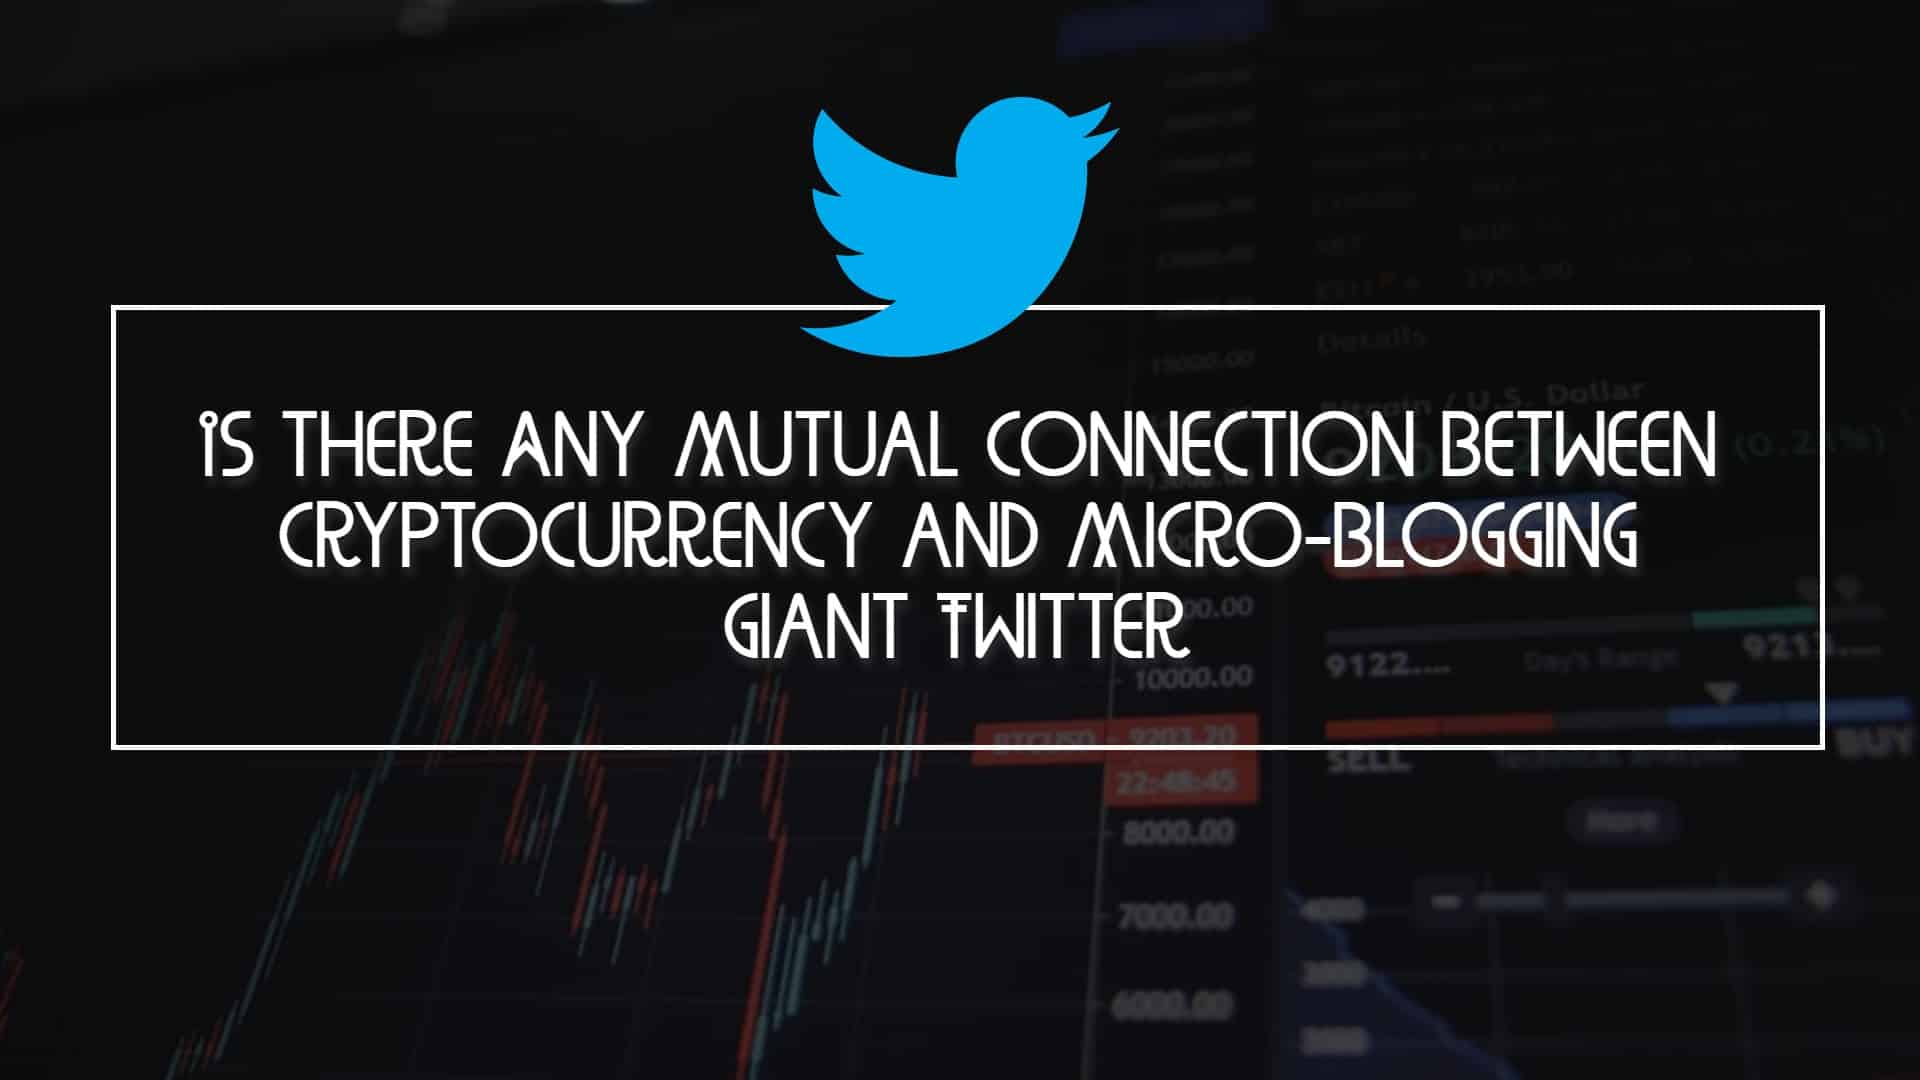 Is There Any Mutual Connection Between Cryptocurrency And Micro-Blogging Giant Twitter?